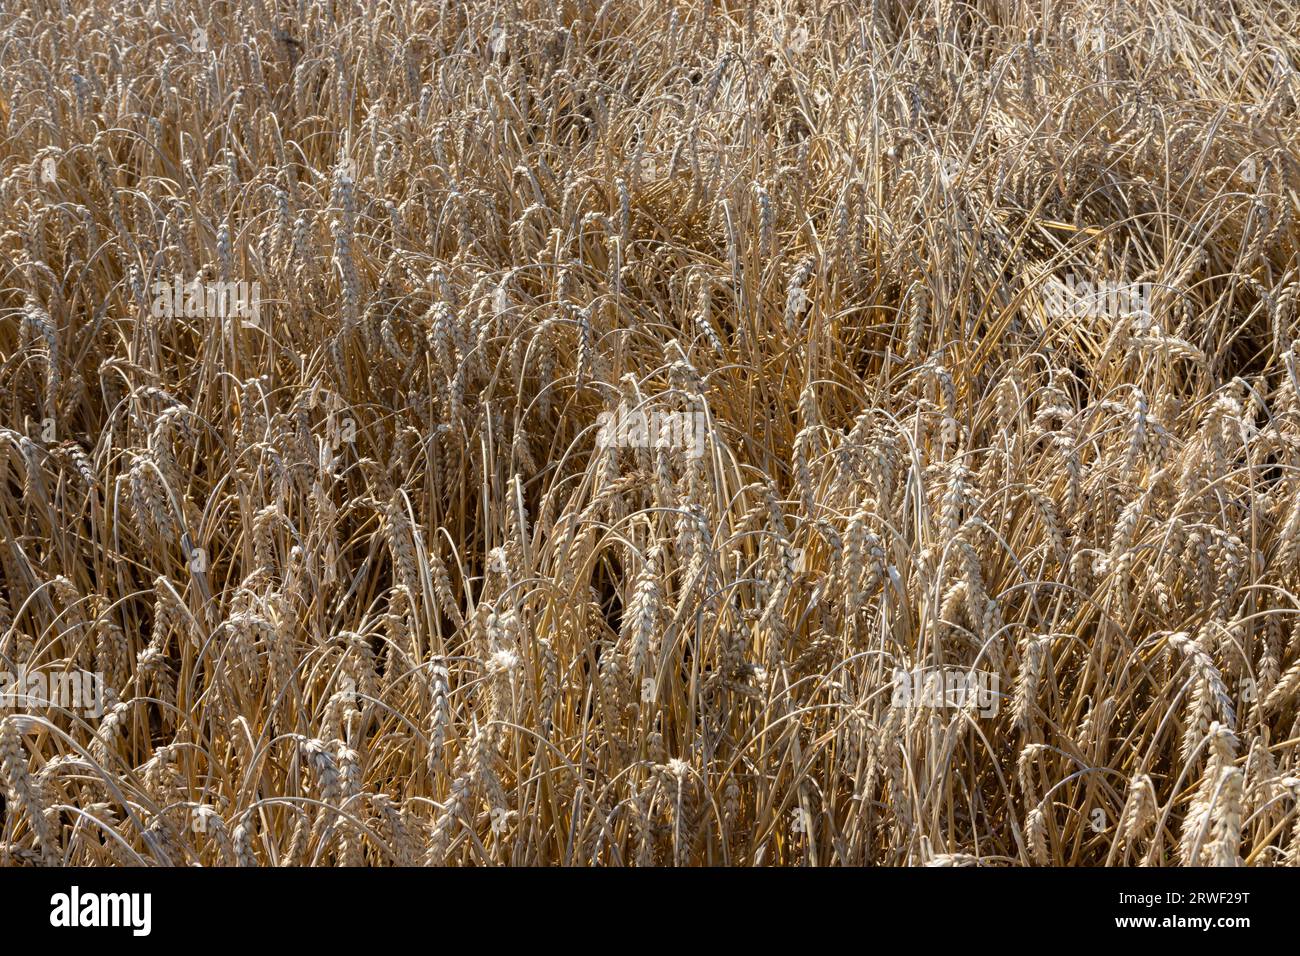 Field of Golden wheat under the blue sky and clouds. Stock Photo